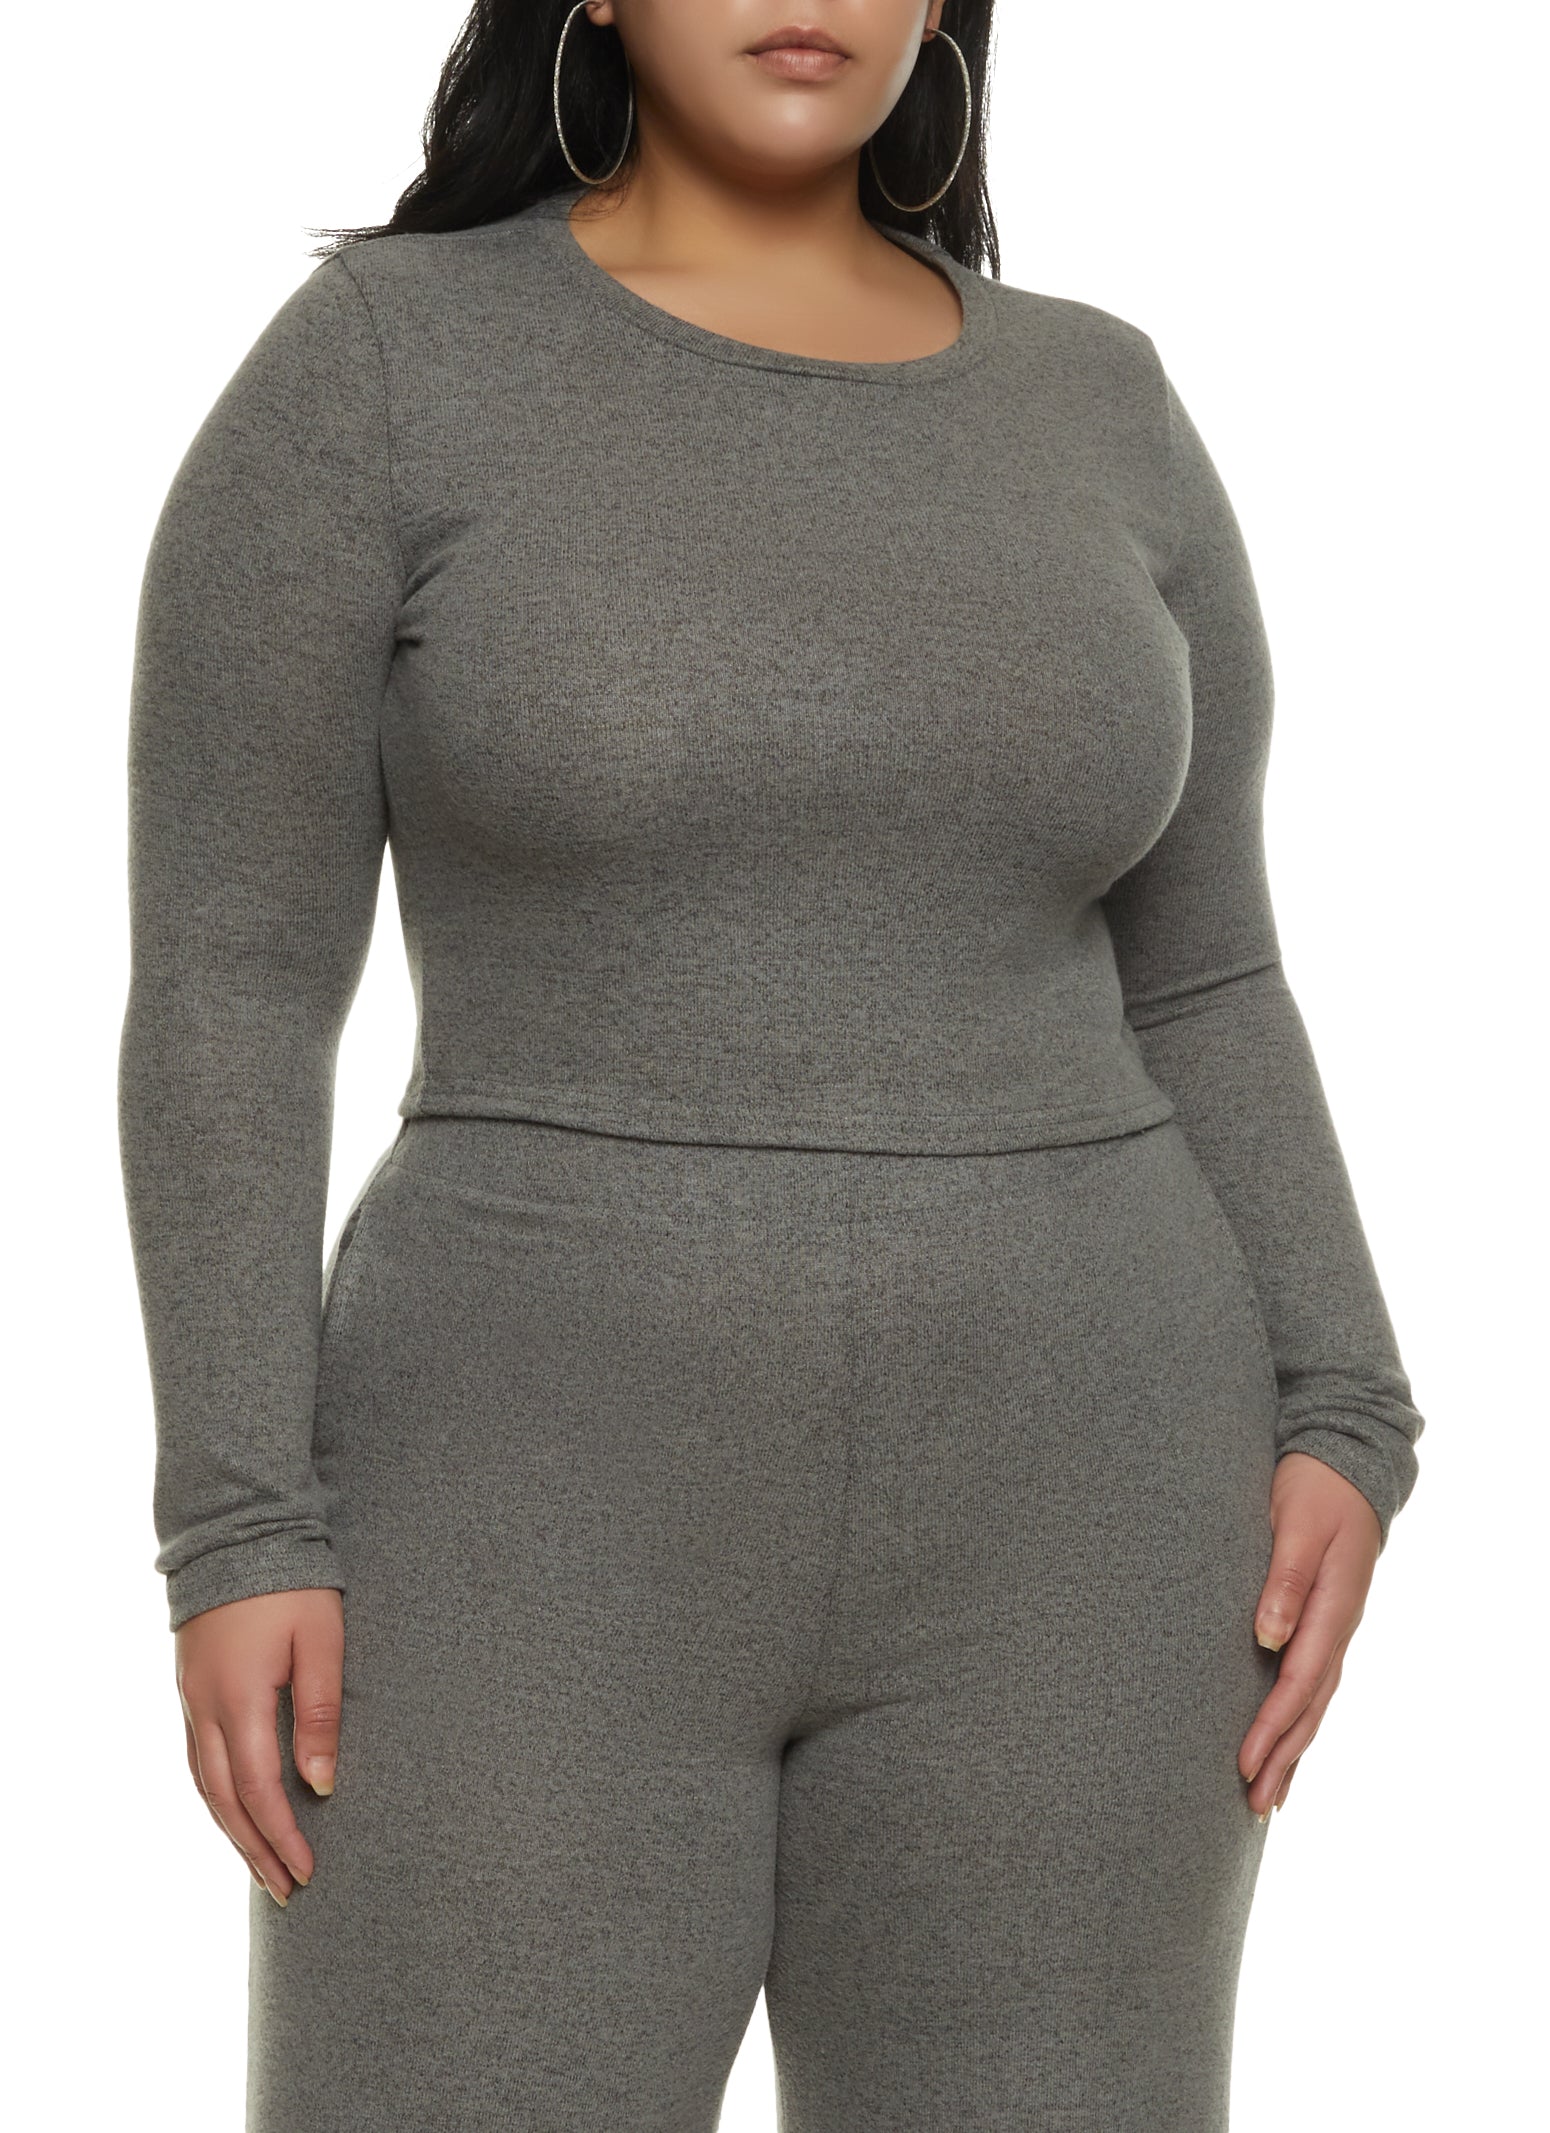 Plus Size Brushed Knit Long Sleeve Crop Top